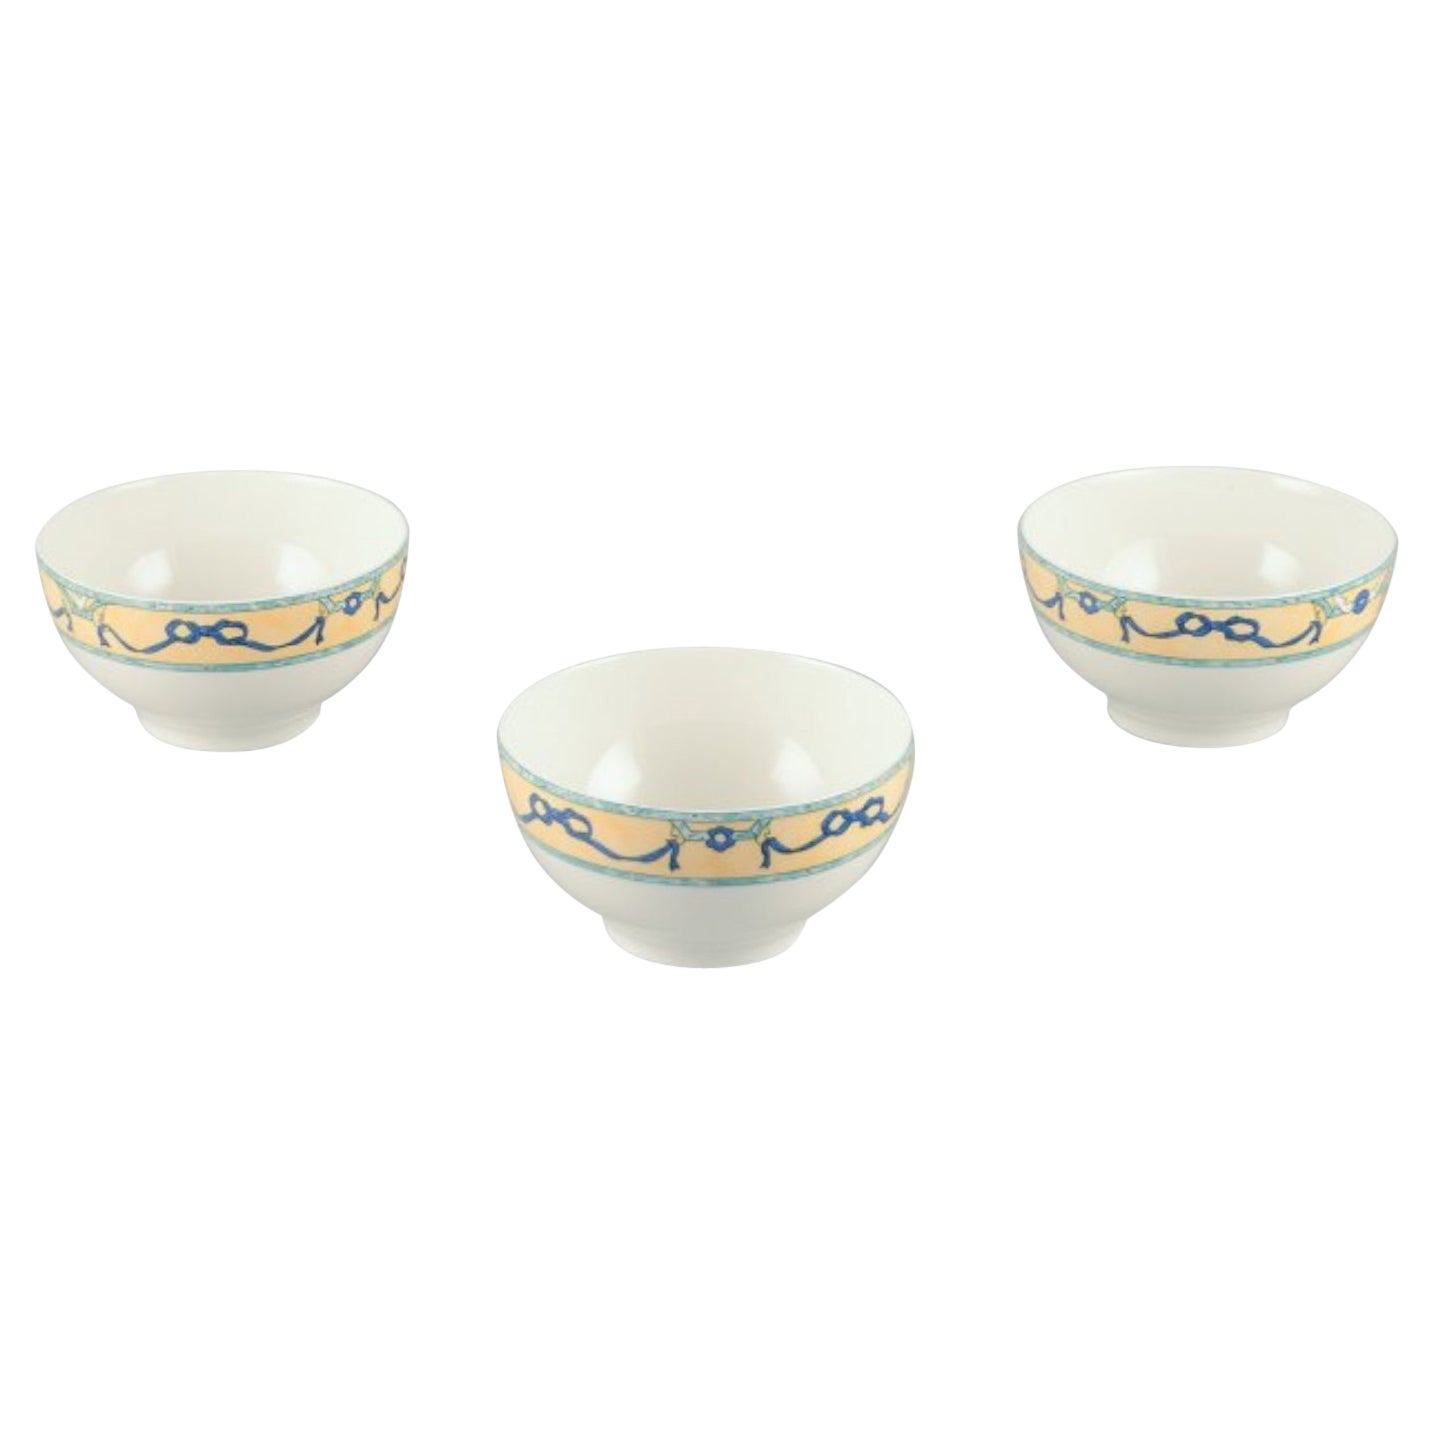 Villeroy & Boch, Luxembourg, set of three "Castellina" porcelain bowls.